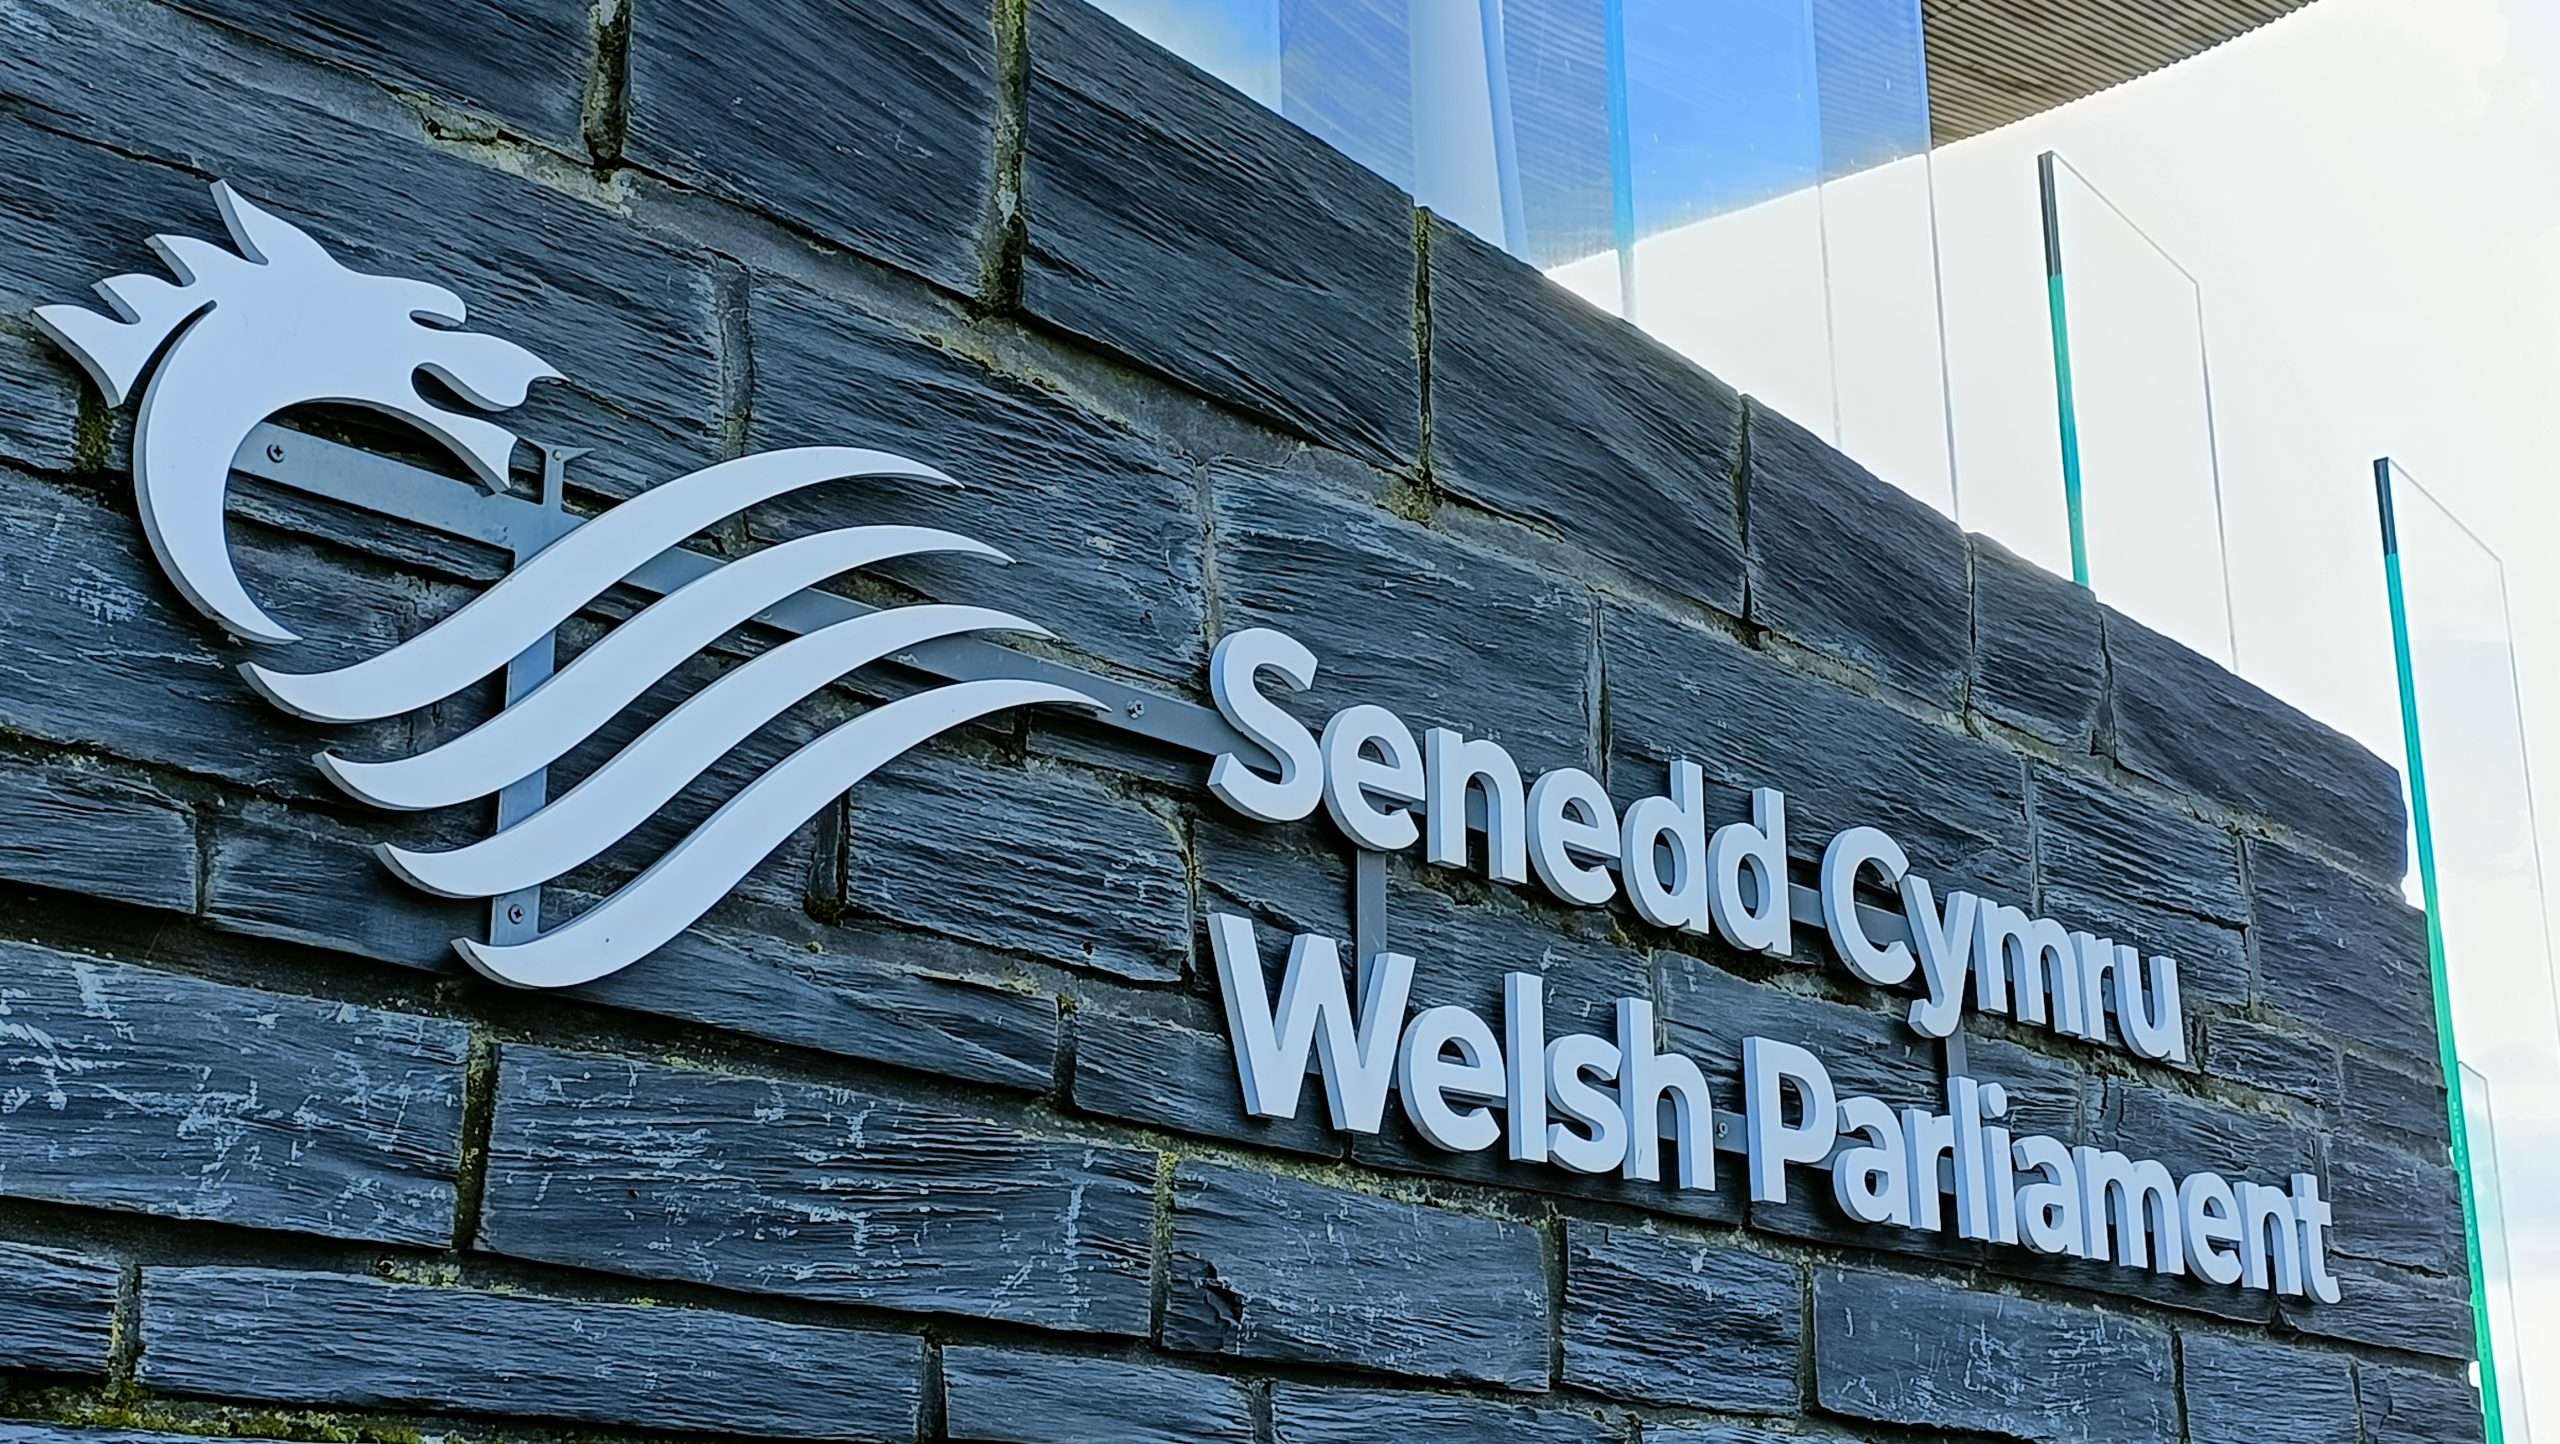 Plaid questions Welsh Labour’s ‘disappearing WhatsApp messages’